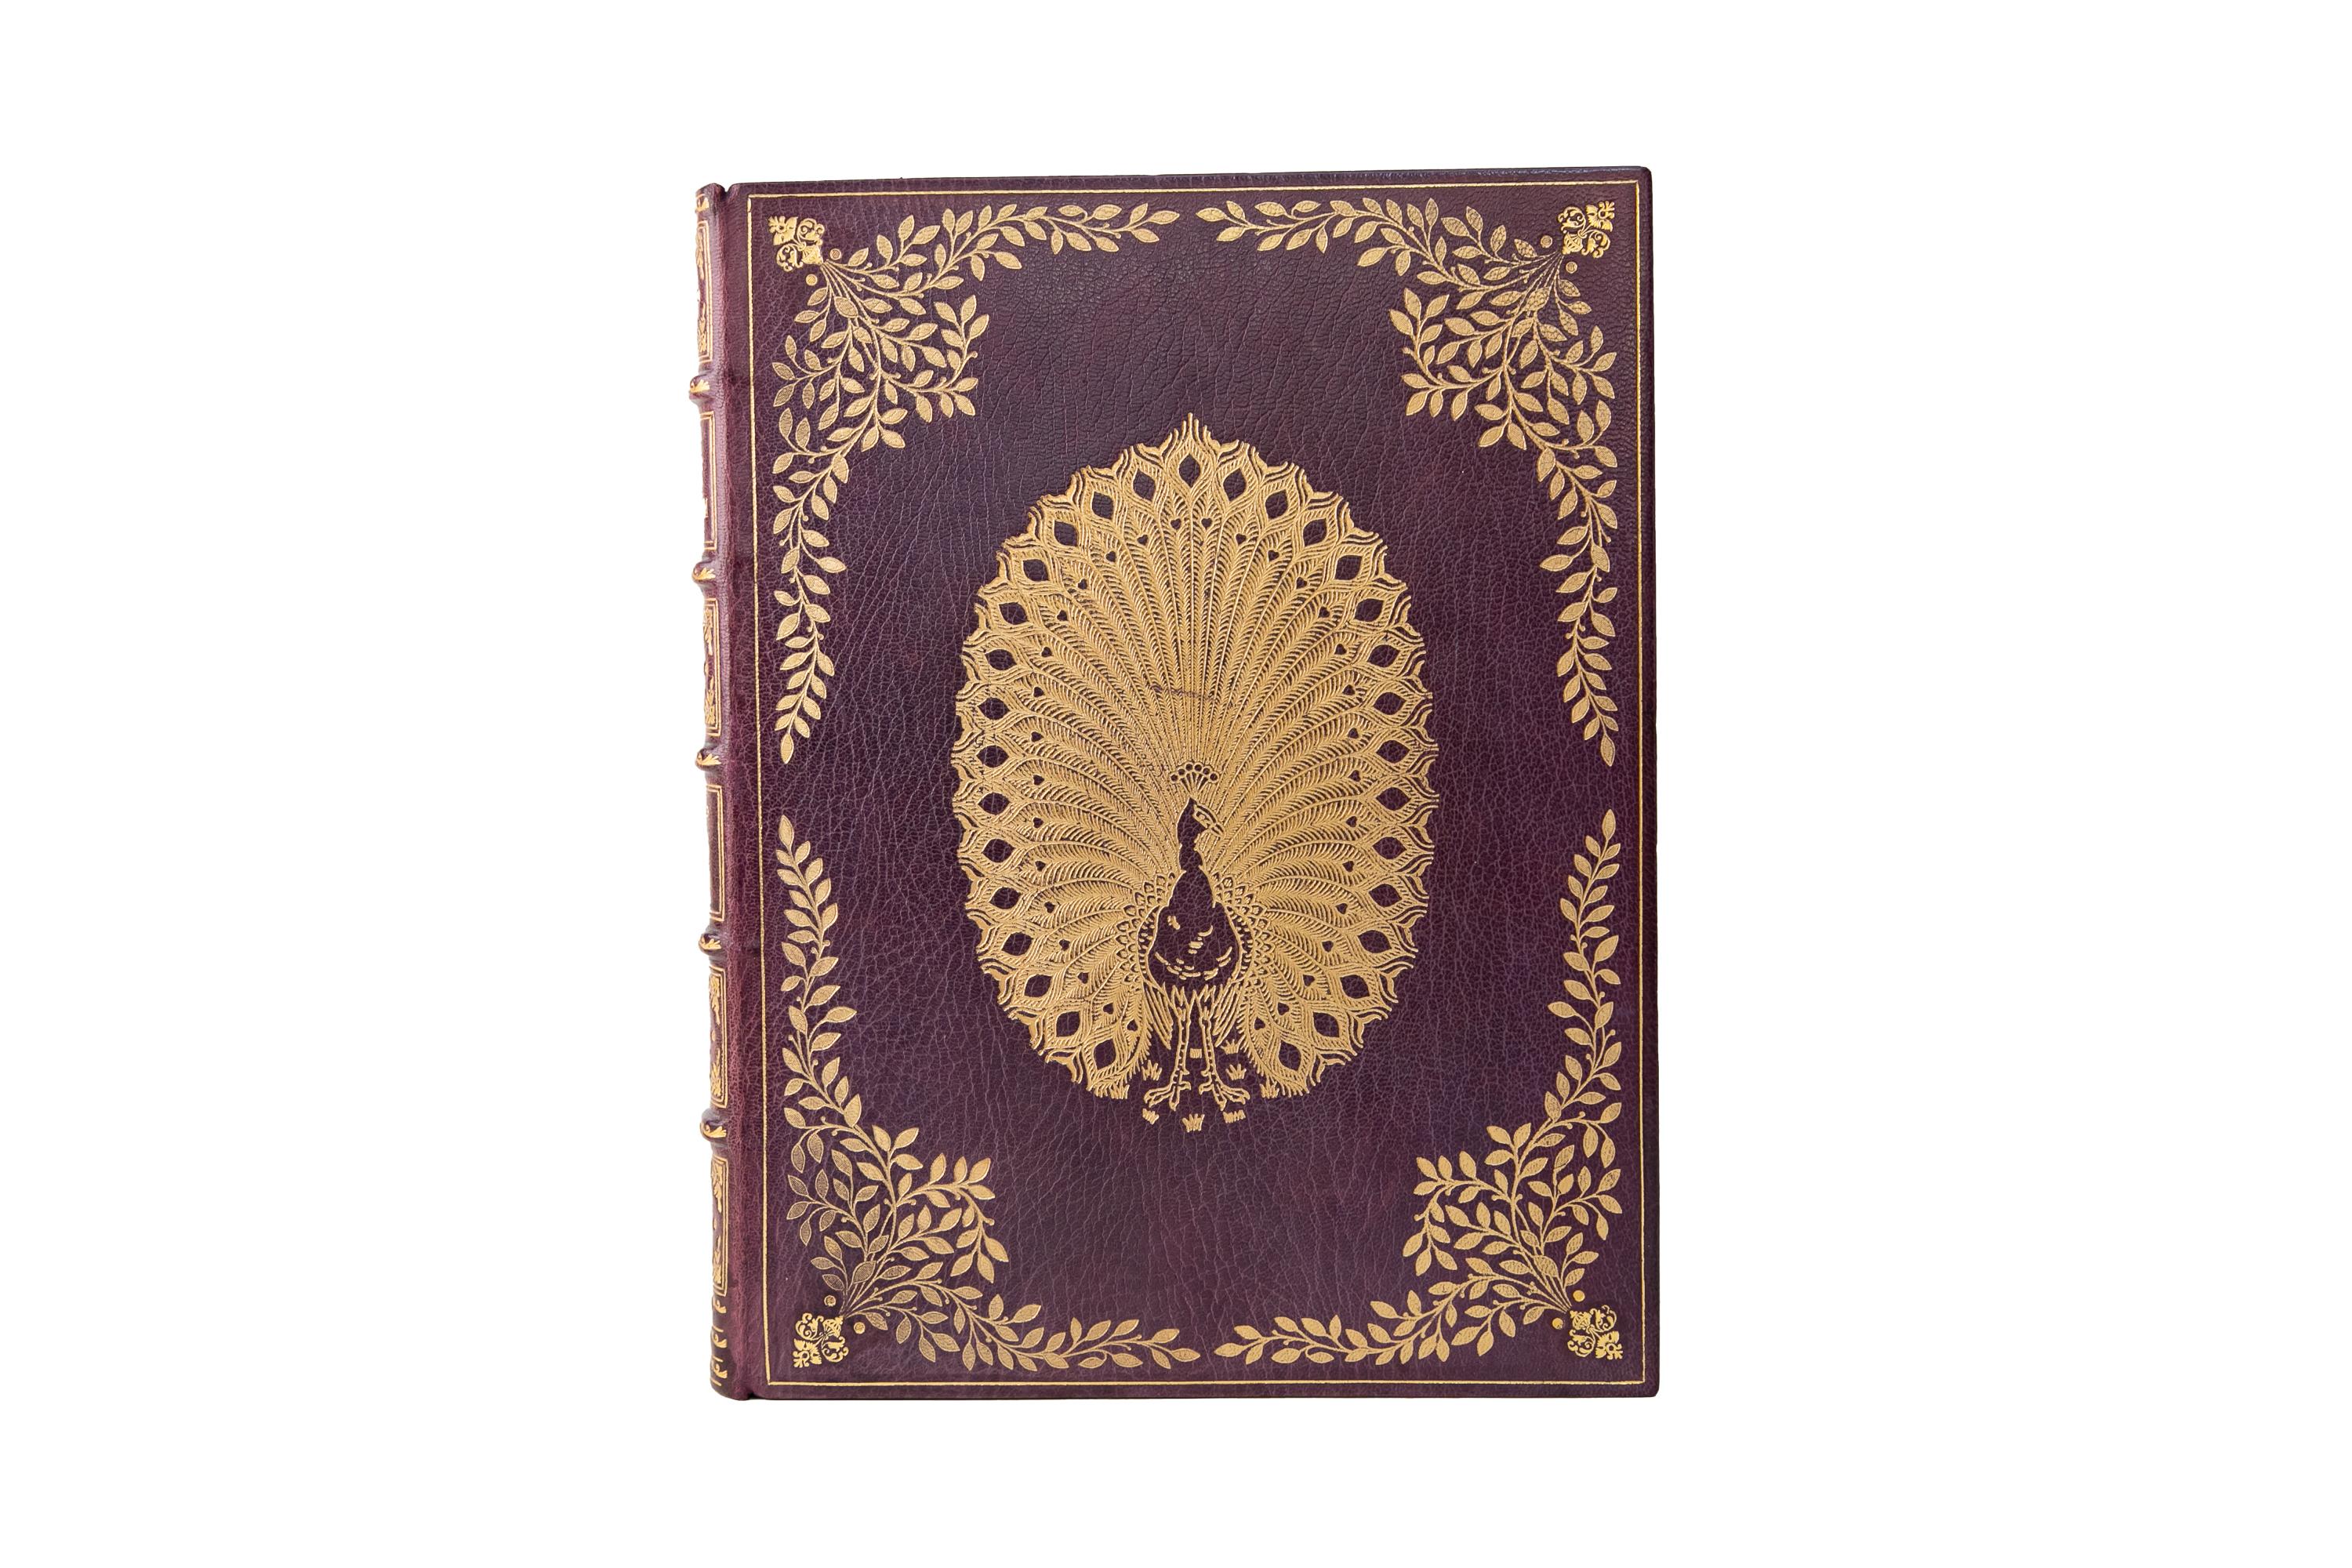 1 Volume. Edward Fitzgerald, Rubáiyát of Omar Khayyám. Signed Limited Edition. Bound by Zaehnsdorf in full purple morocco with an ornate gilt-tooled cover displaying a peacock bordered in vines and raised band spine with ornate gilt-tooled